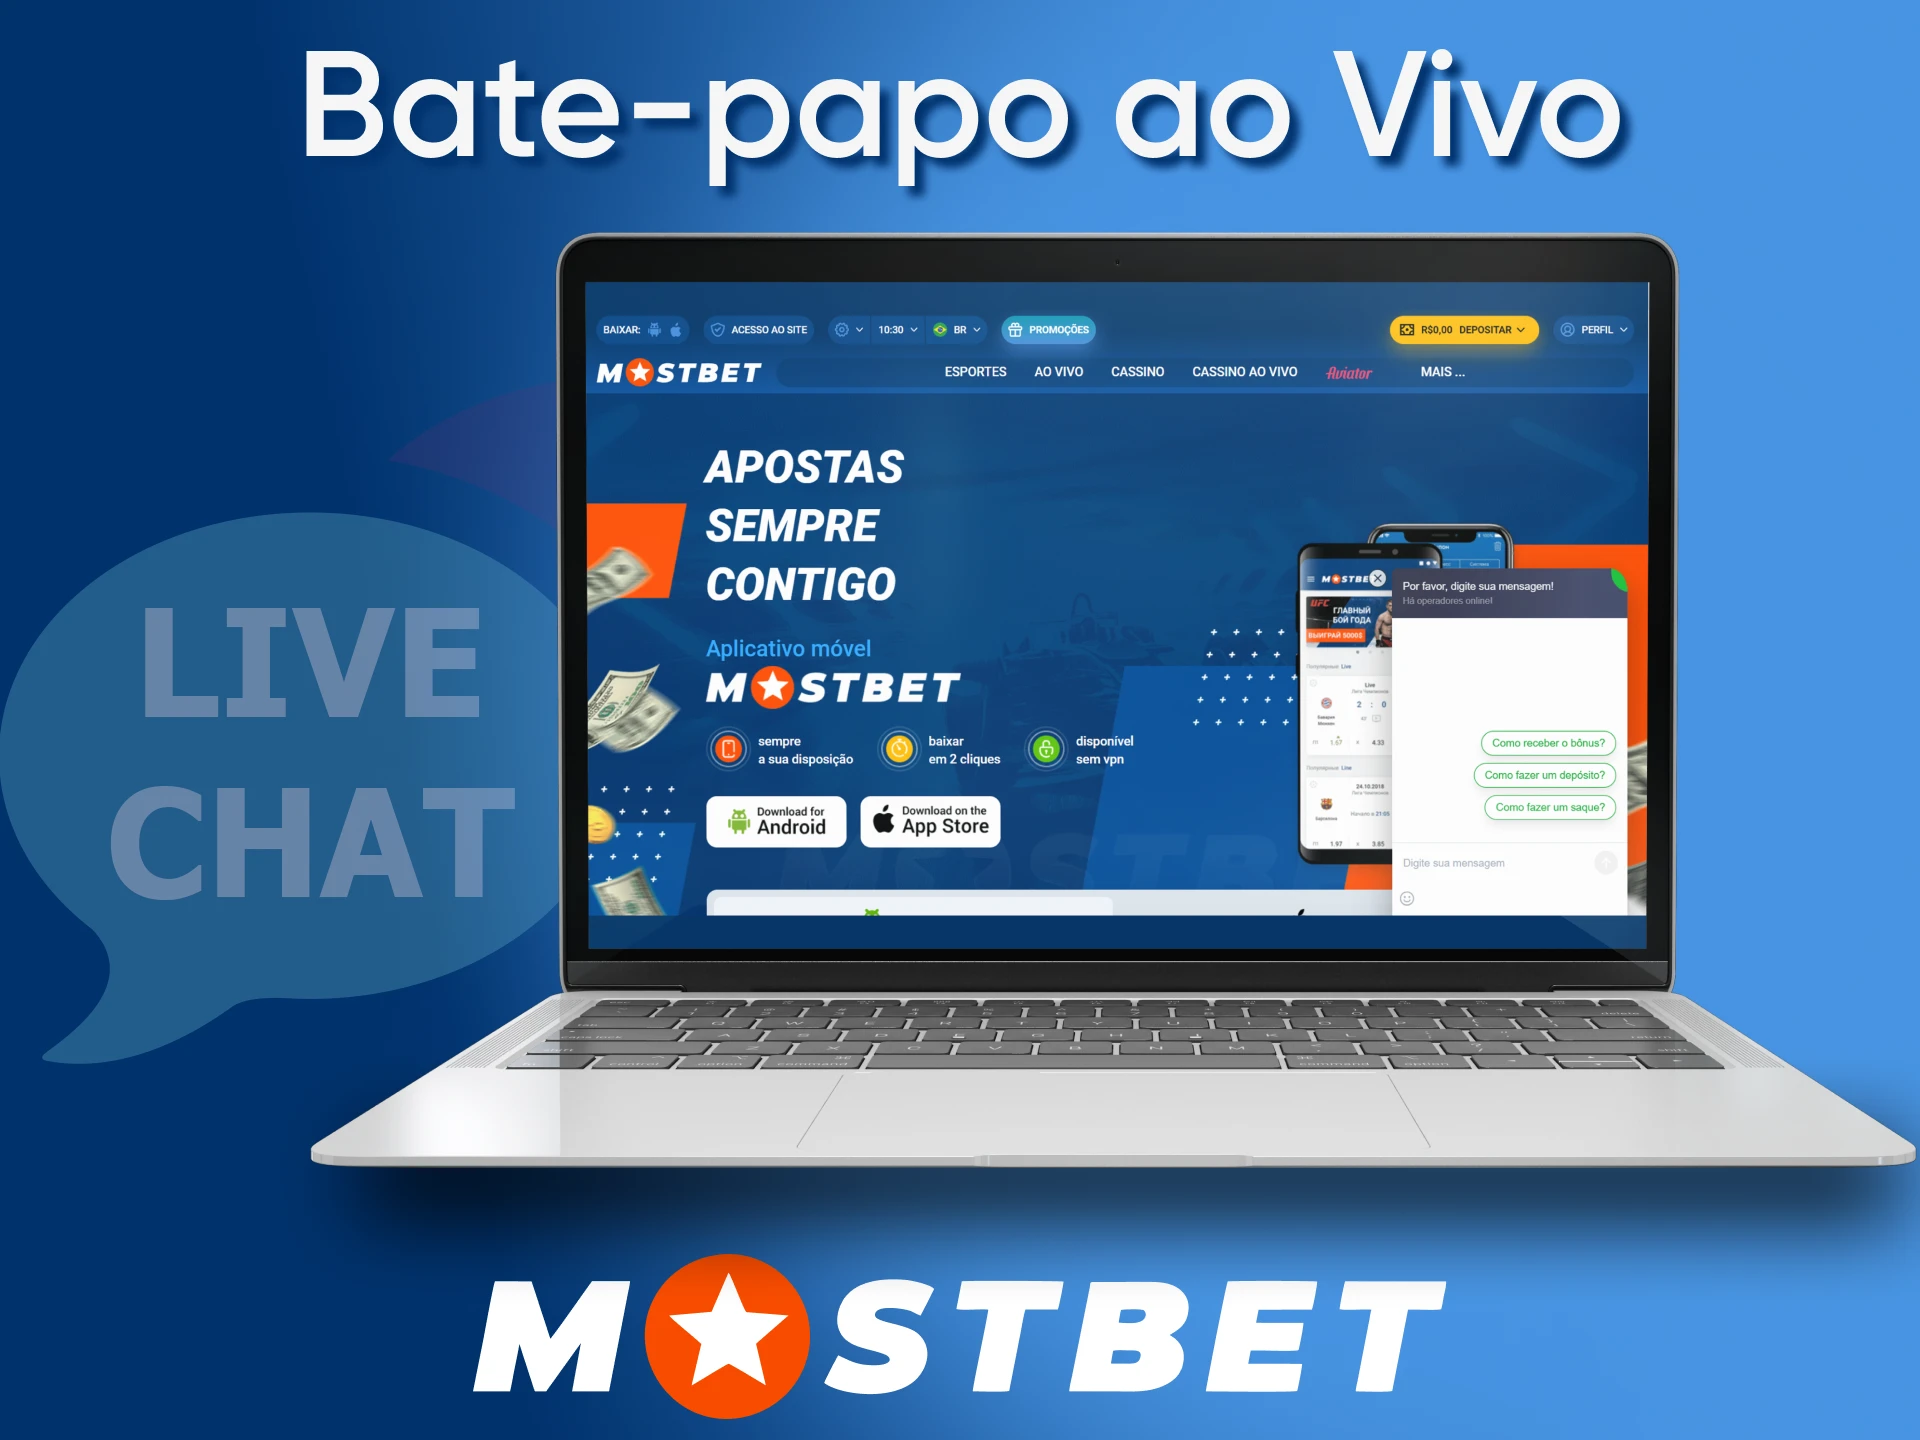 Get in touch with the Mostbet team via live chat on the website and in the app.